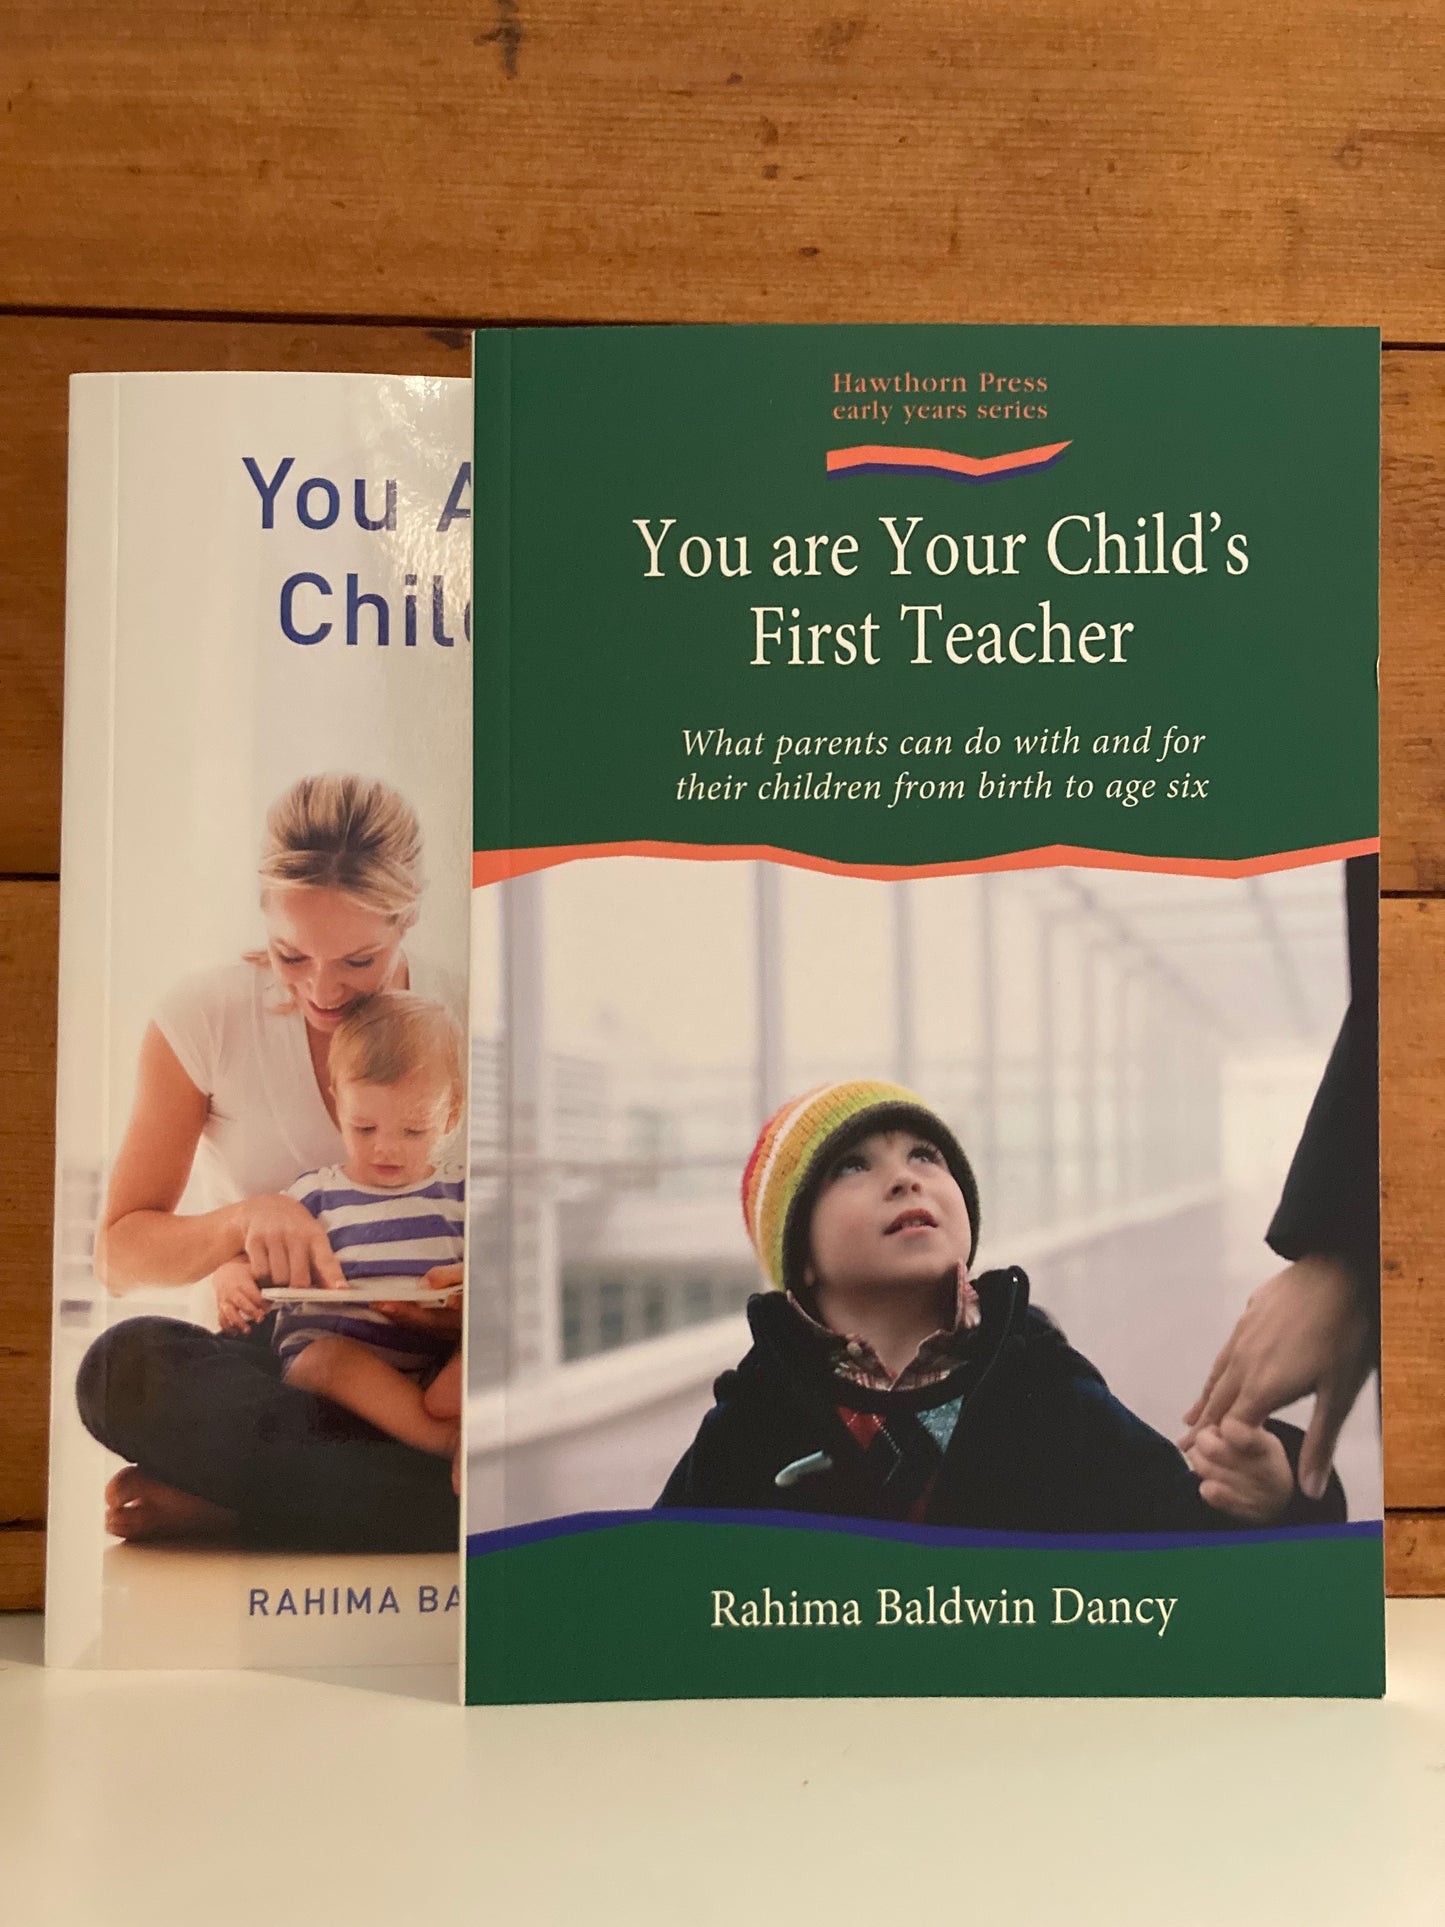 Parenting Resource Book - YOU ARE YOUR CHILD'S FIRST TEACHER